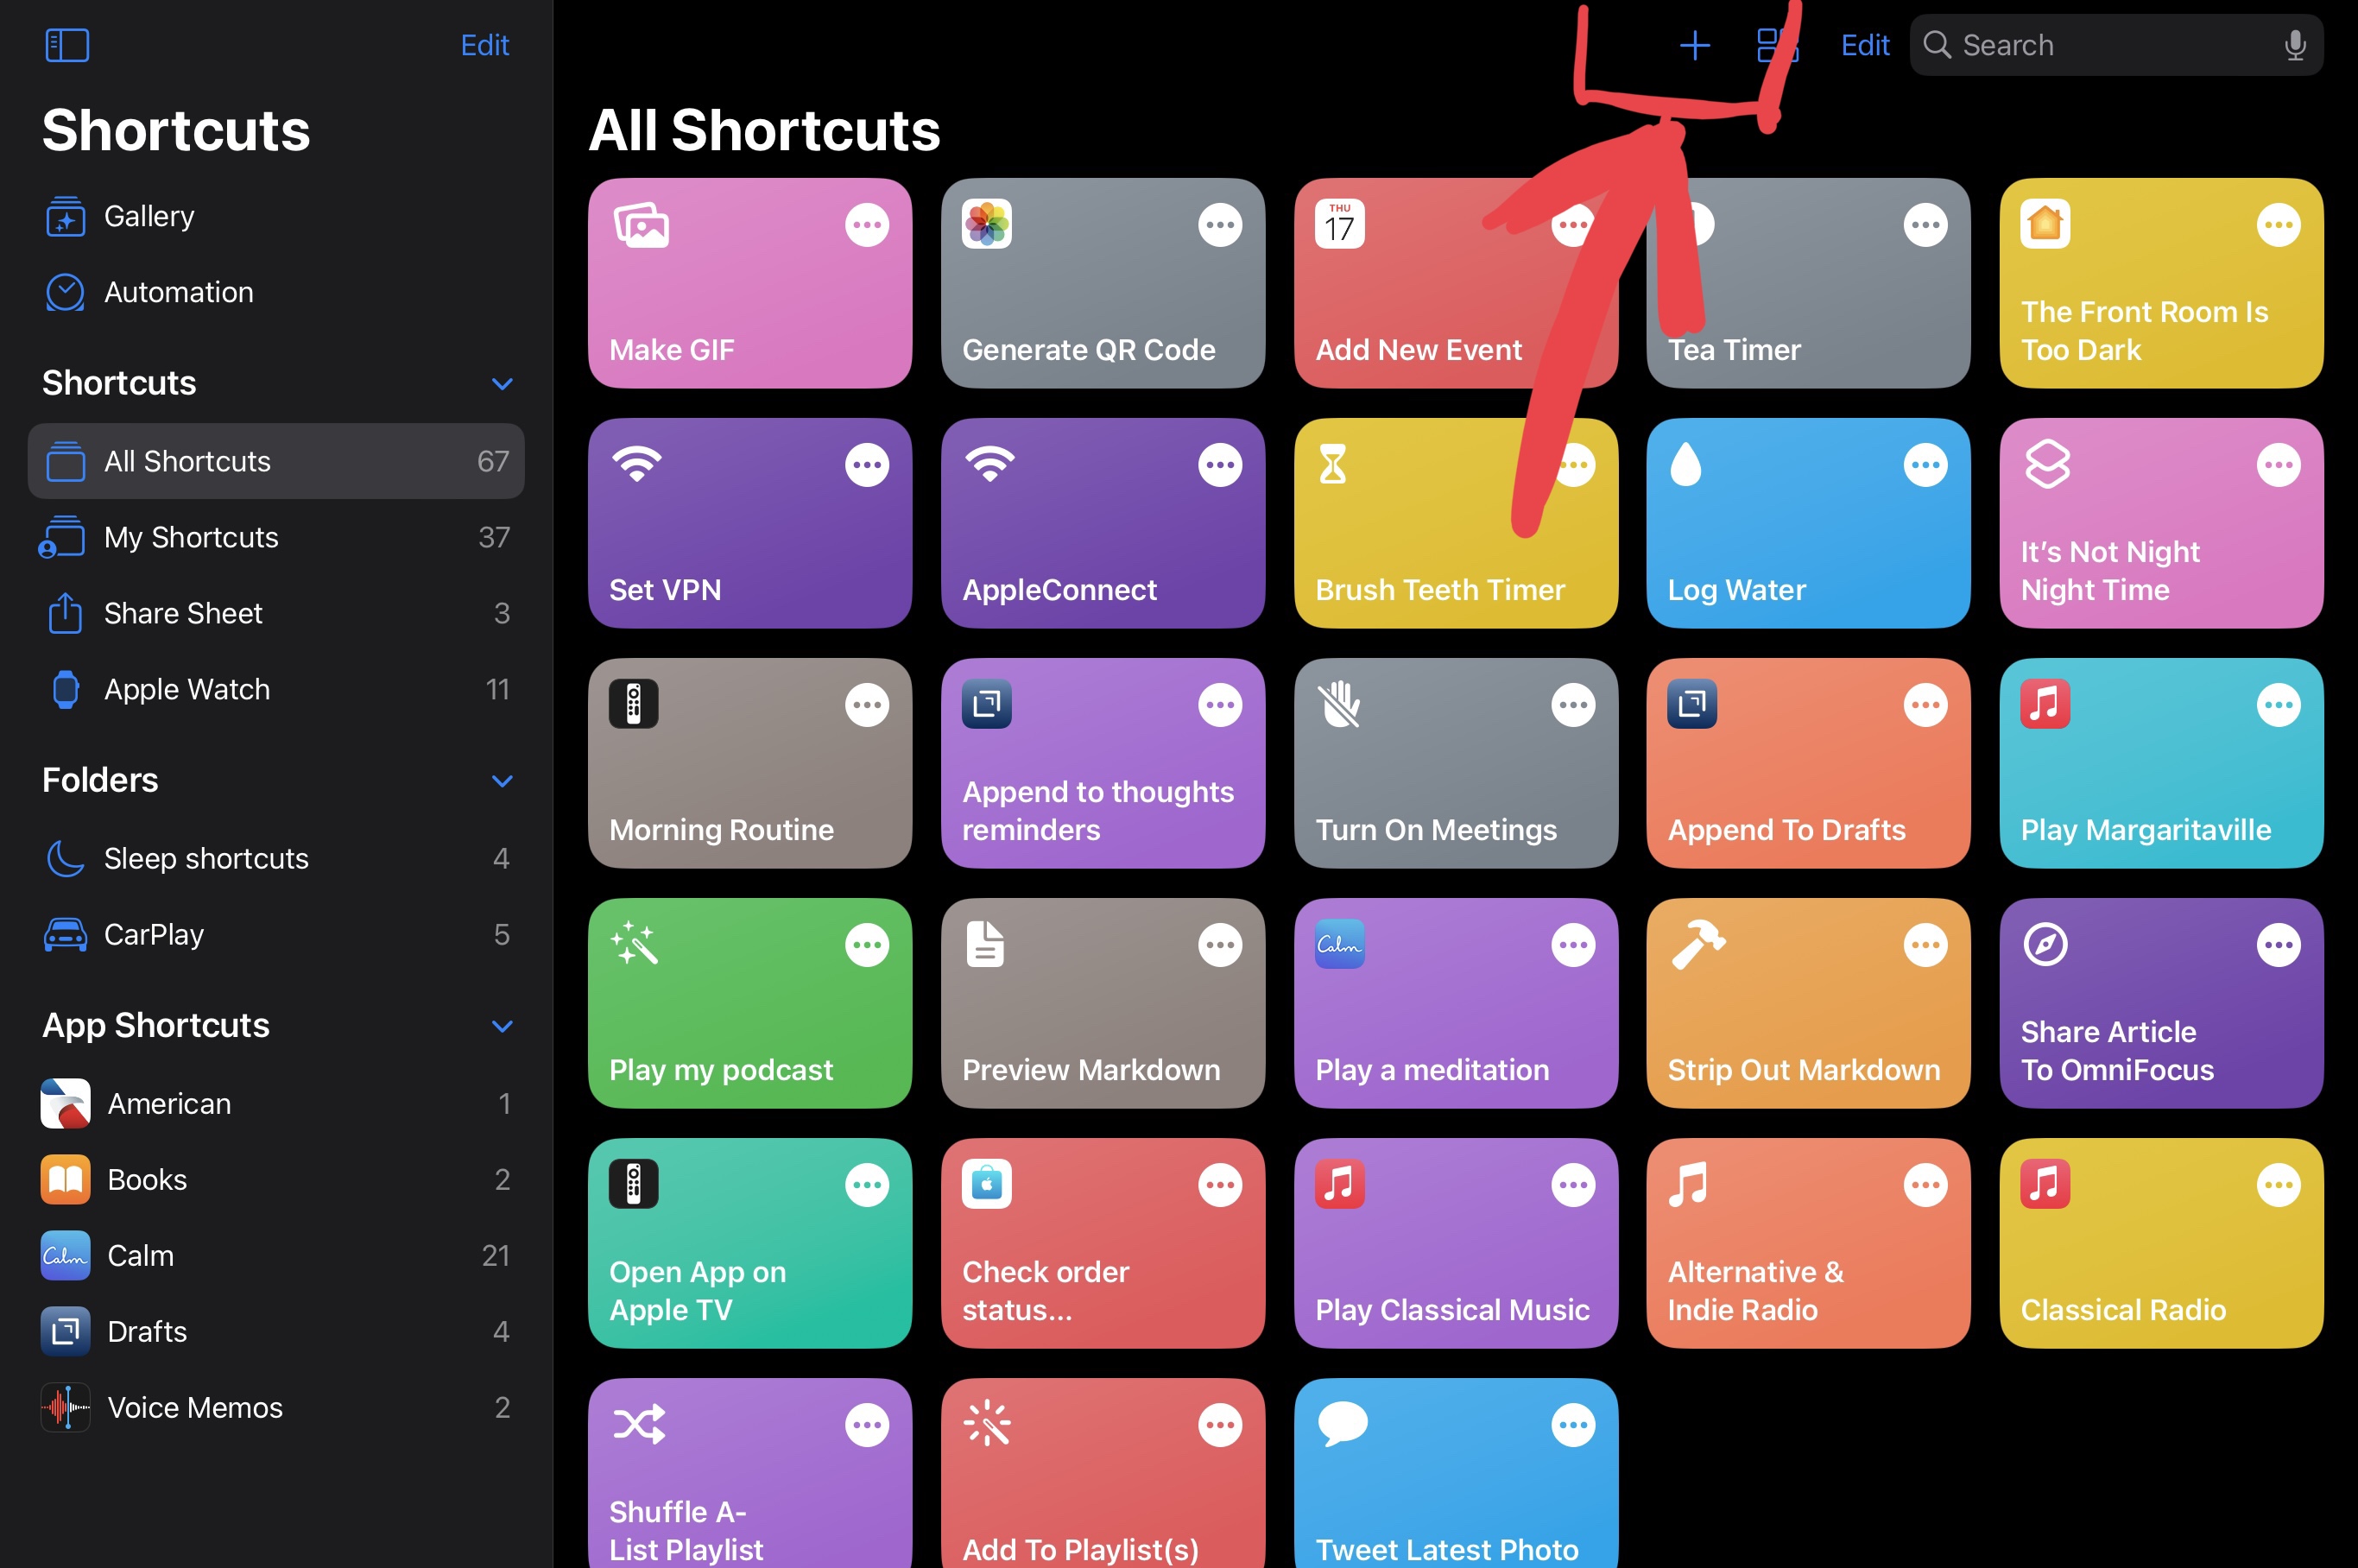 Main screen of the shortcuts app is shown. The plus icon in the top right is circled with an arrow pointing to it.